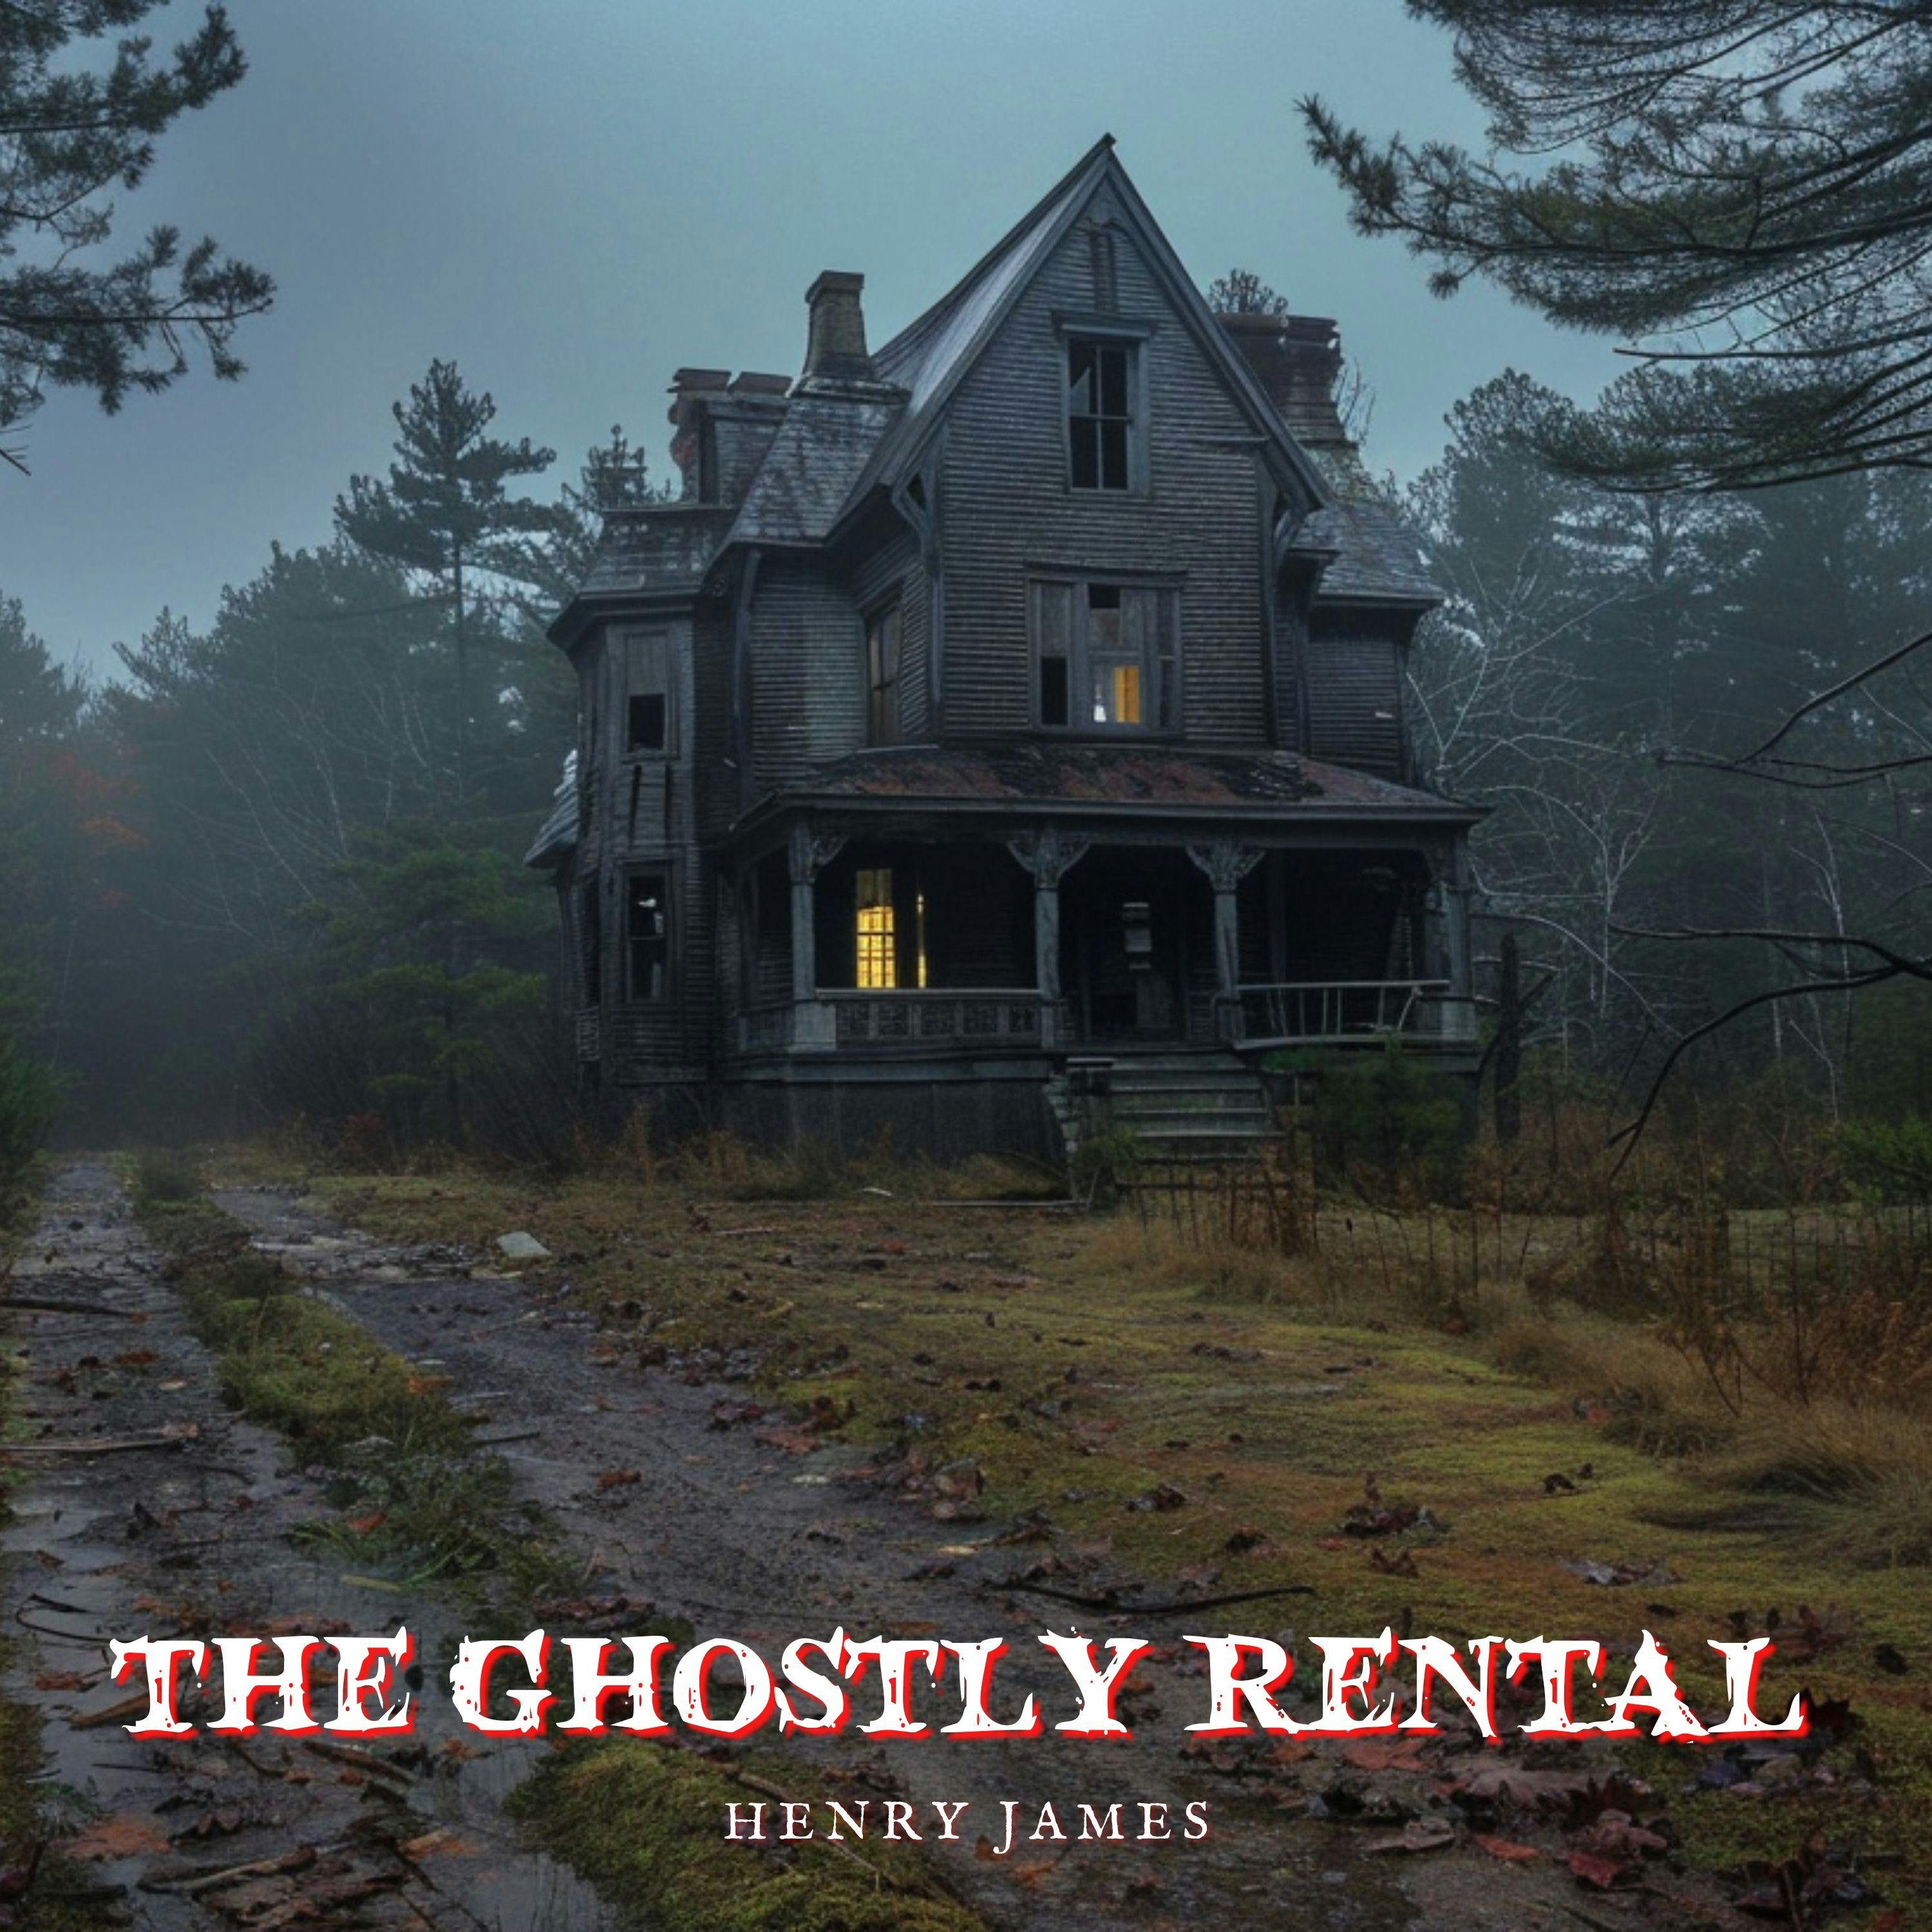 The Ghostly Rental by Henry James